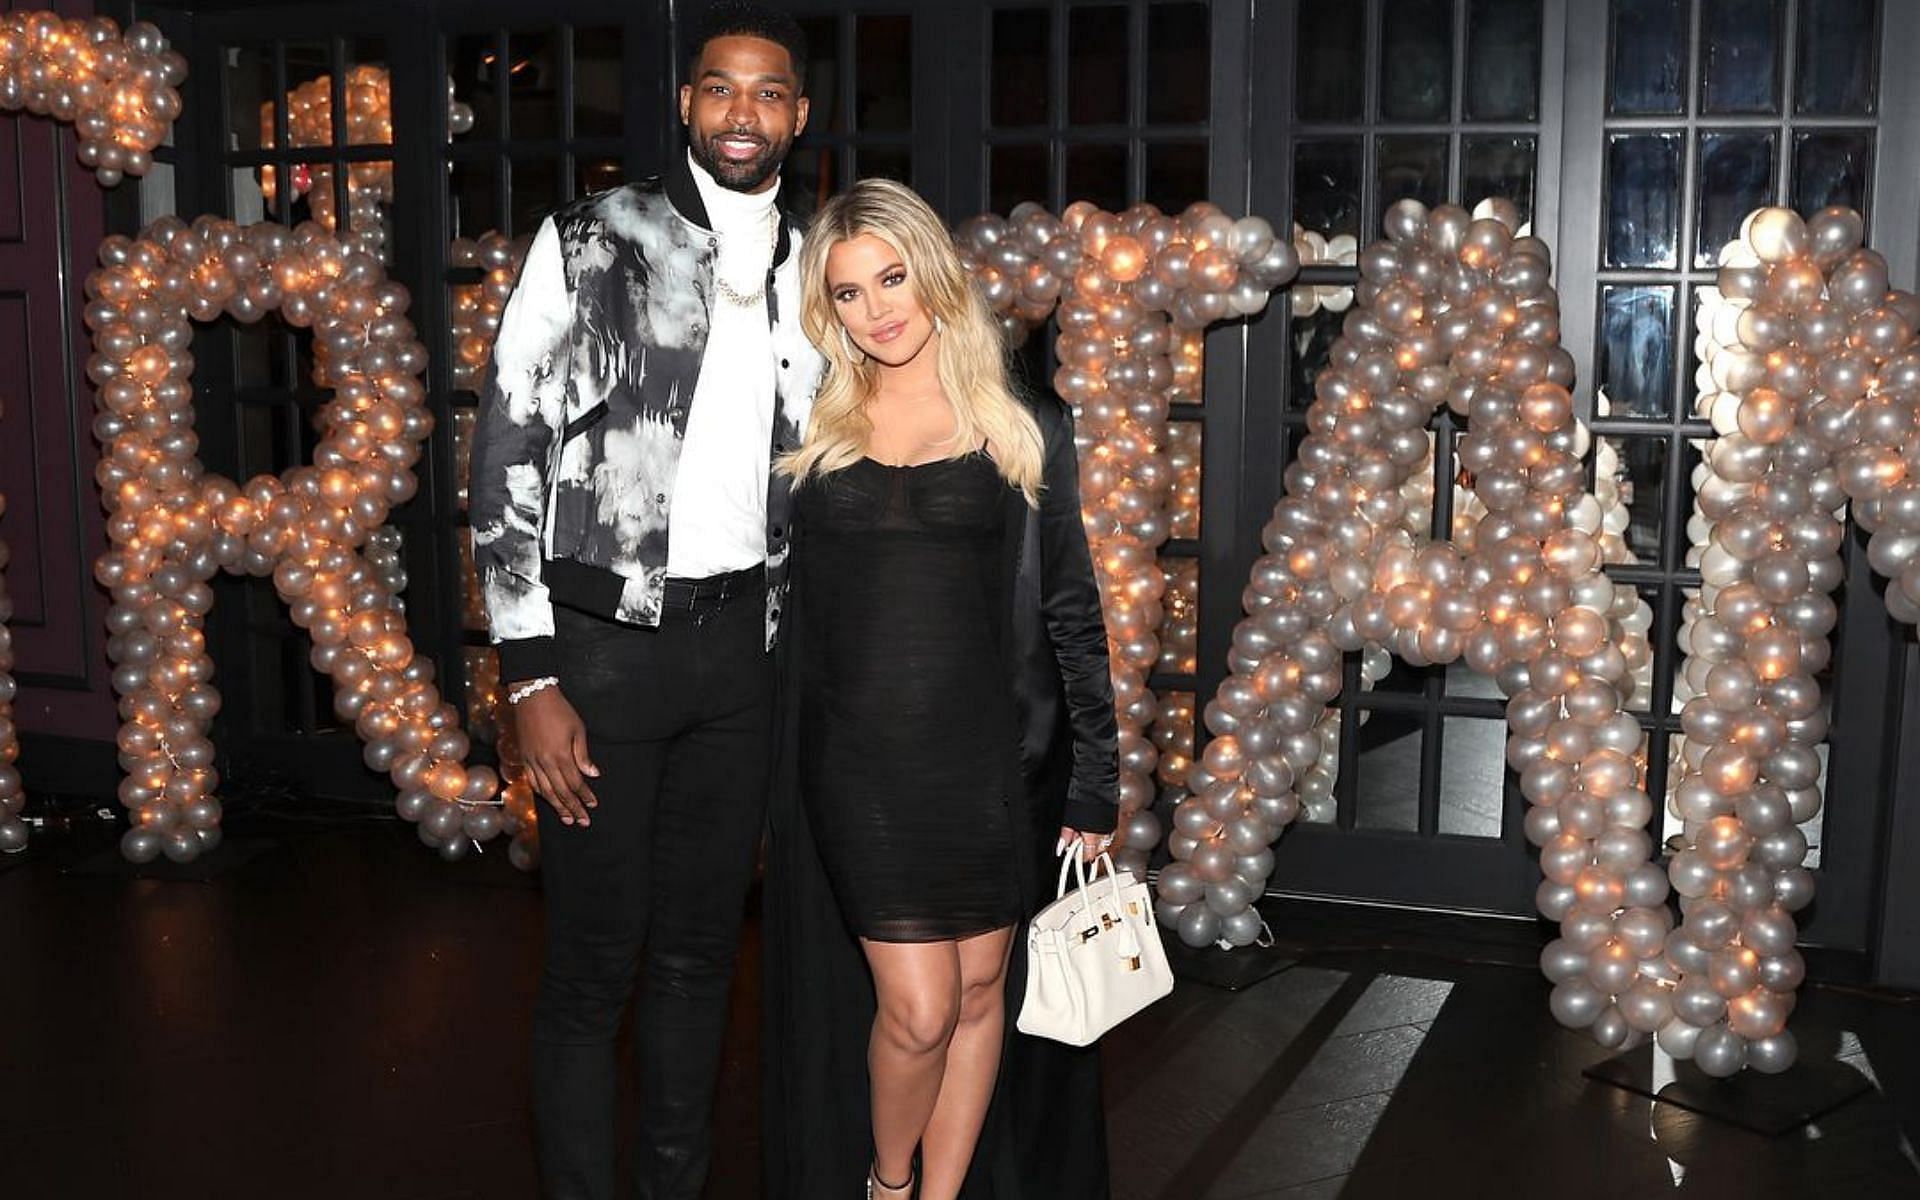 When Did Khloe Kardashian Find Out About Tristan Thompson Timeline Explored As News Of Second